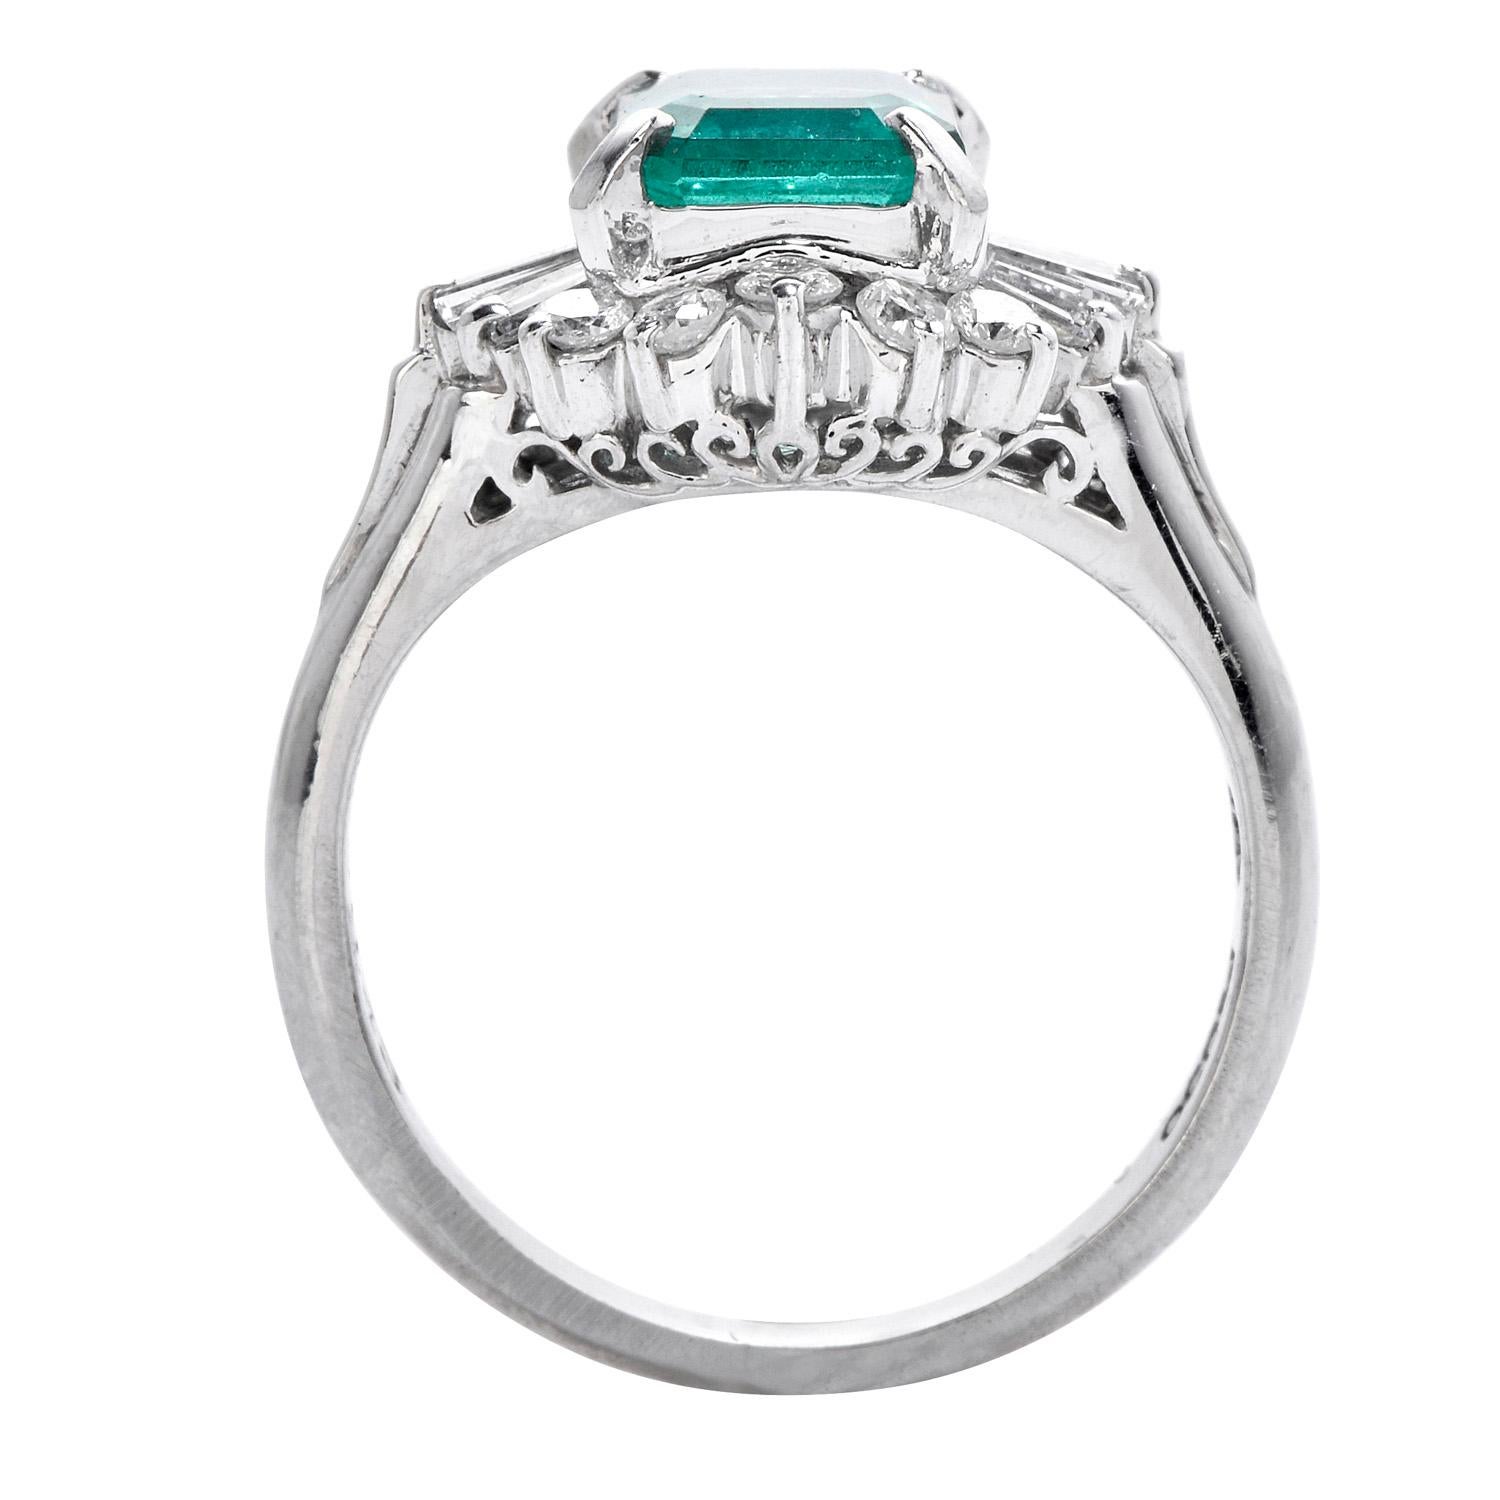 Exuding femineity and grace this exquisite, transparent Natural Beryl Emerald has no treatments un-like some emeralds and is set in solid platinum, weighing approx. 0.97-carat weight. 

Subtly surrounded by Genuine Diamonds, the 10 round brilliant